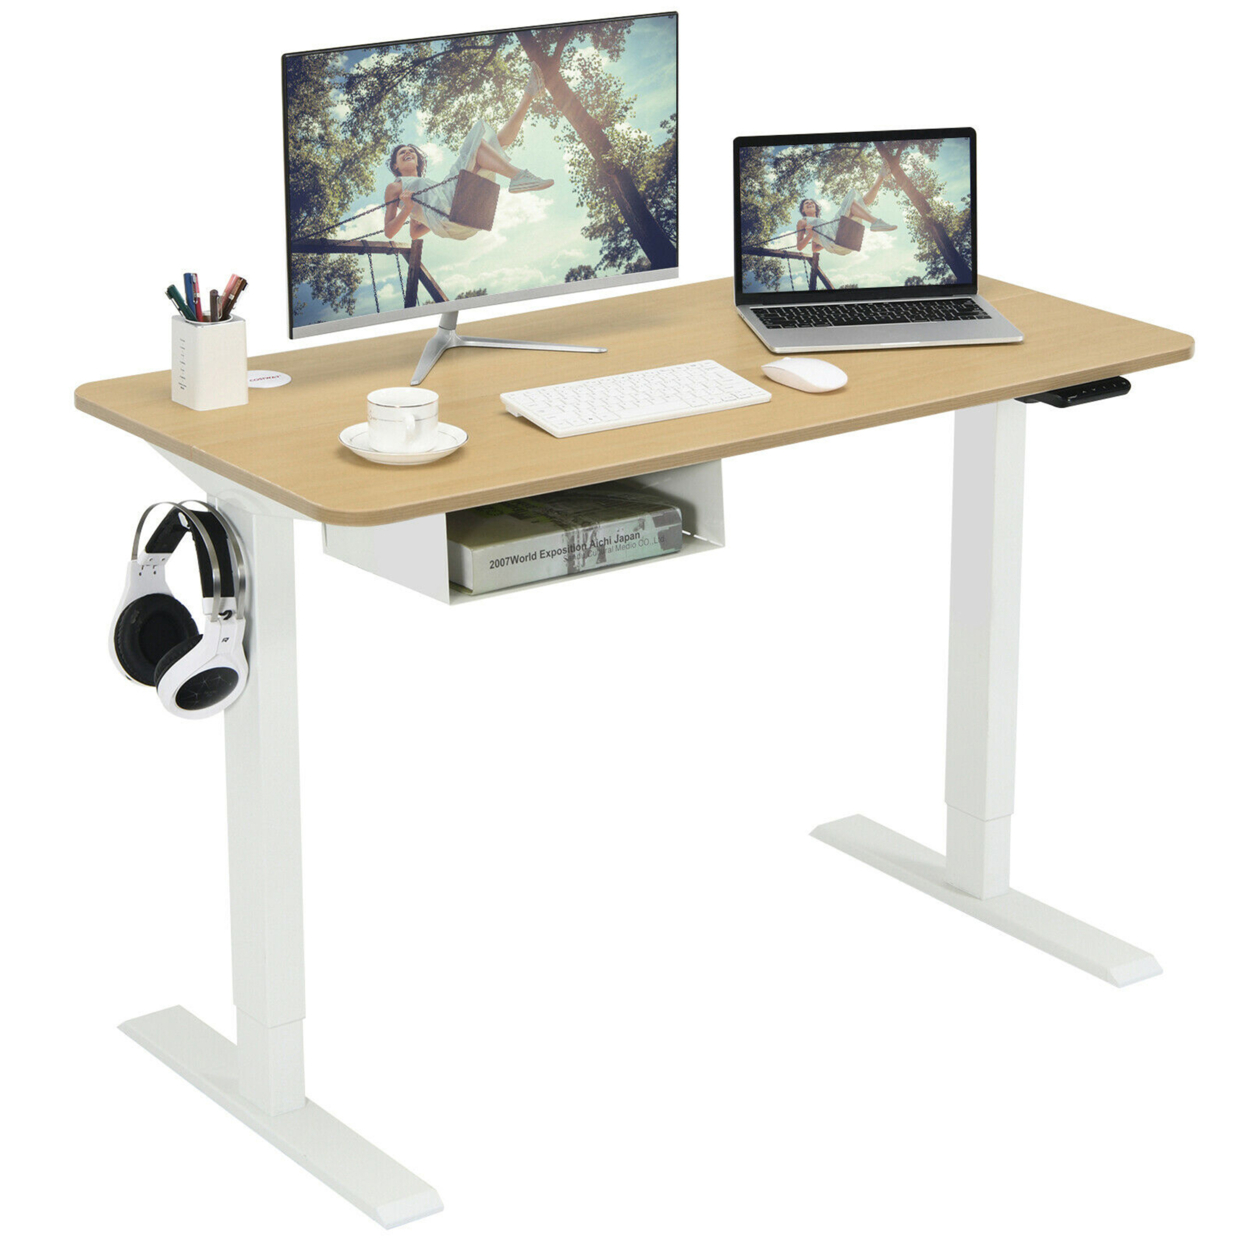 48'' Electric Standing Desk Height Adjustable W/ Control Panel & USB Port - Natural